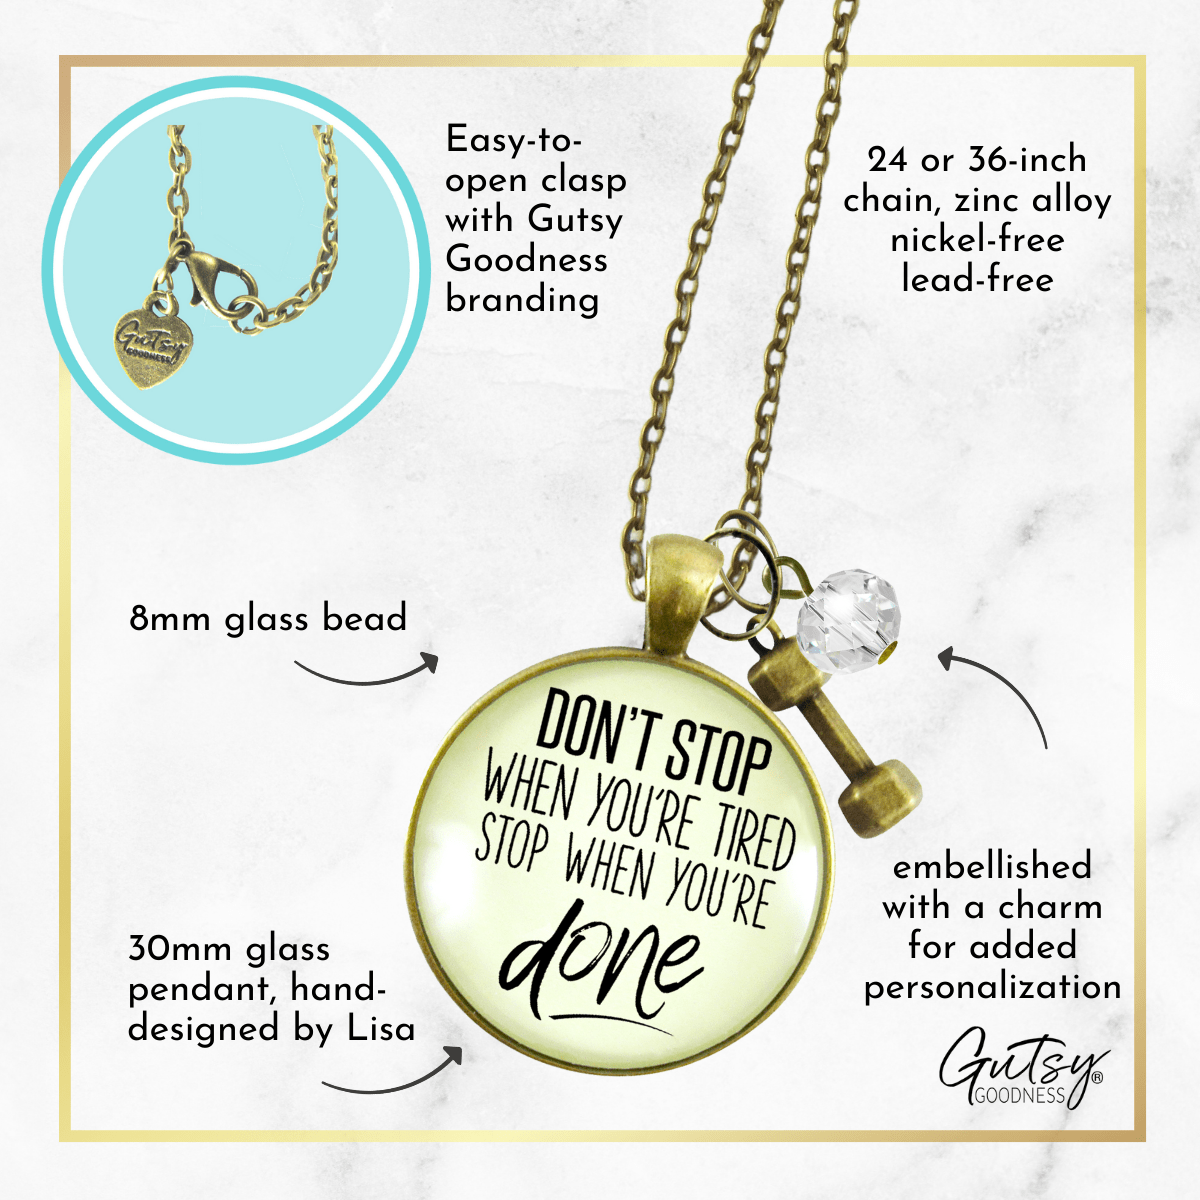 Don't Stop When Tired Necklace Mantra Success Jewelry Barbell Charm - Gutsy Goodness